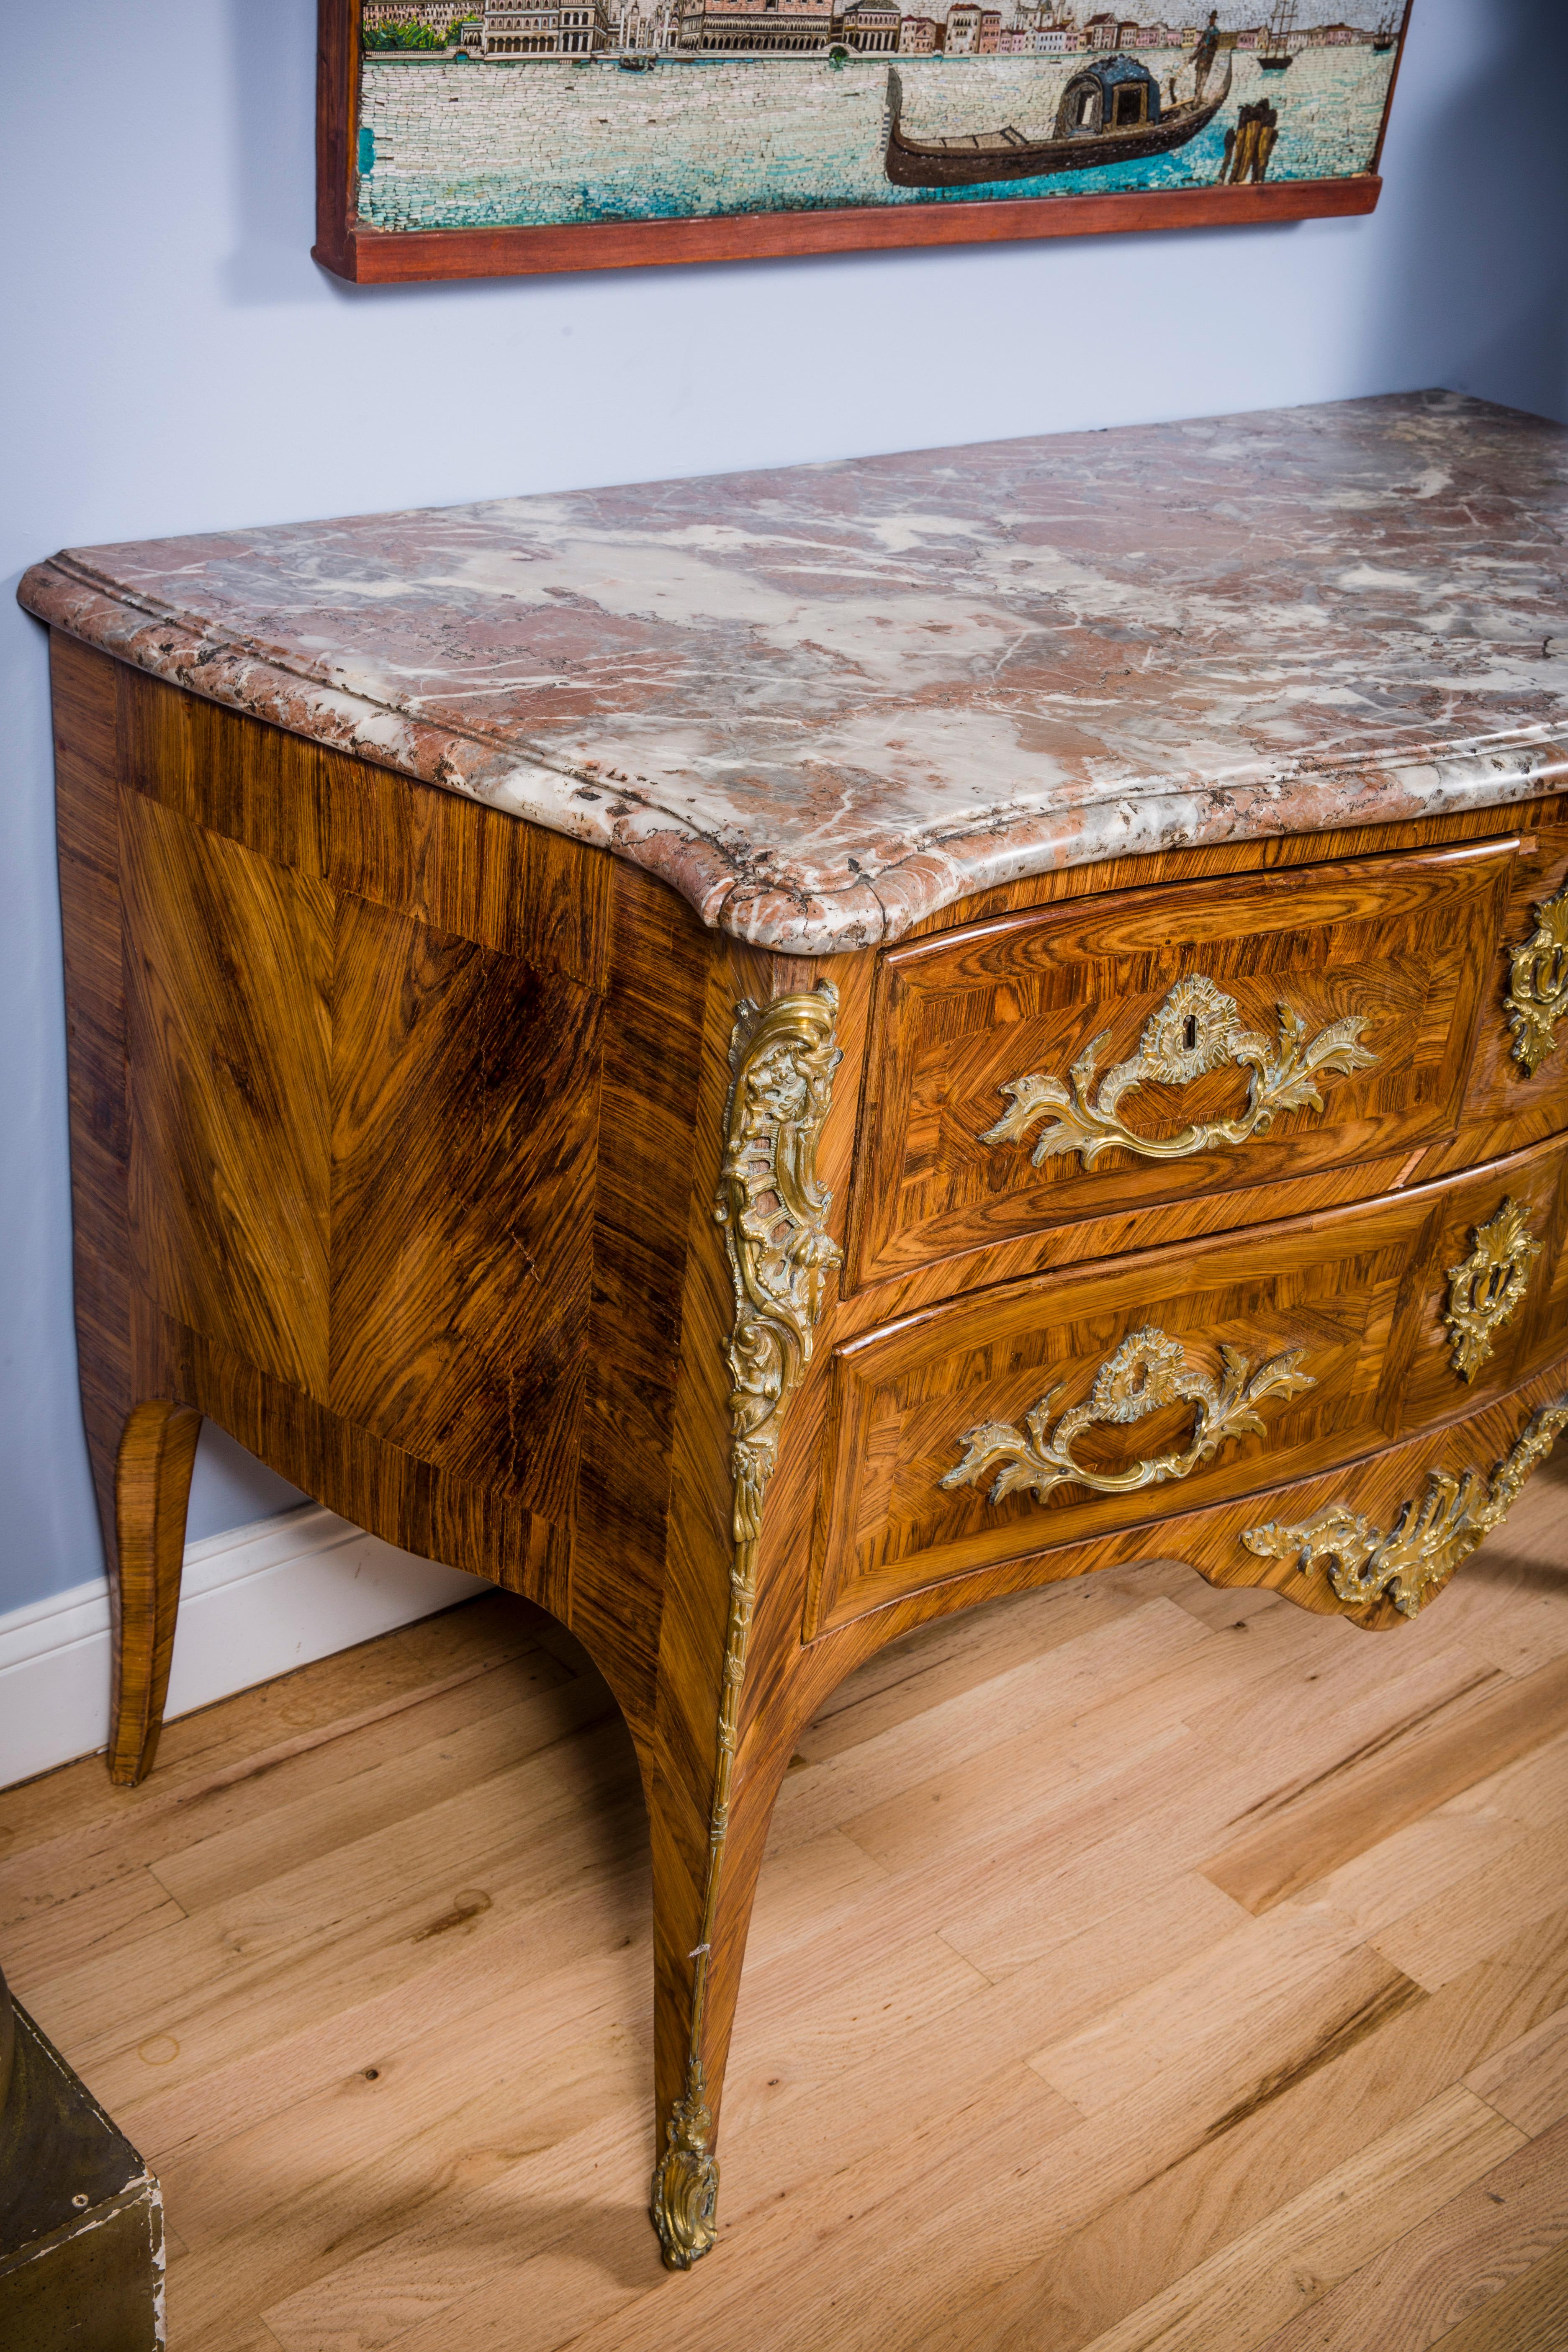 Louis XV Ormolu-Mounted Kingwood Commode
by Nicolas Jean Marchand, c. 1735.
The serpentine form commode has two small drawers above a single long drawer. The commode is mounted with ormolu handles, key escutcheons, chutes, and an apron mount.